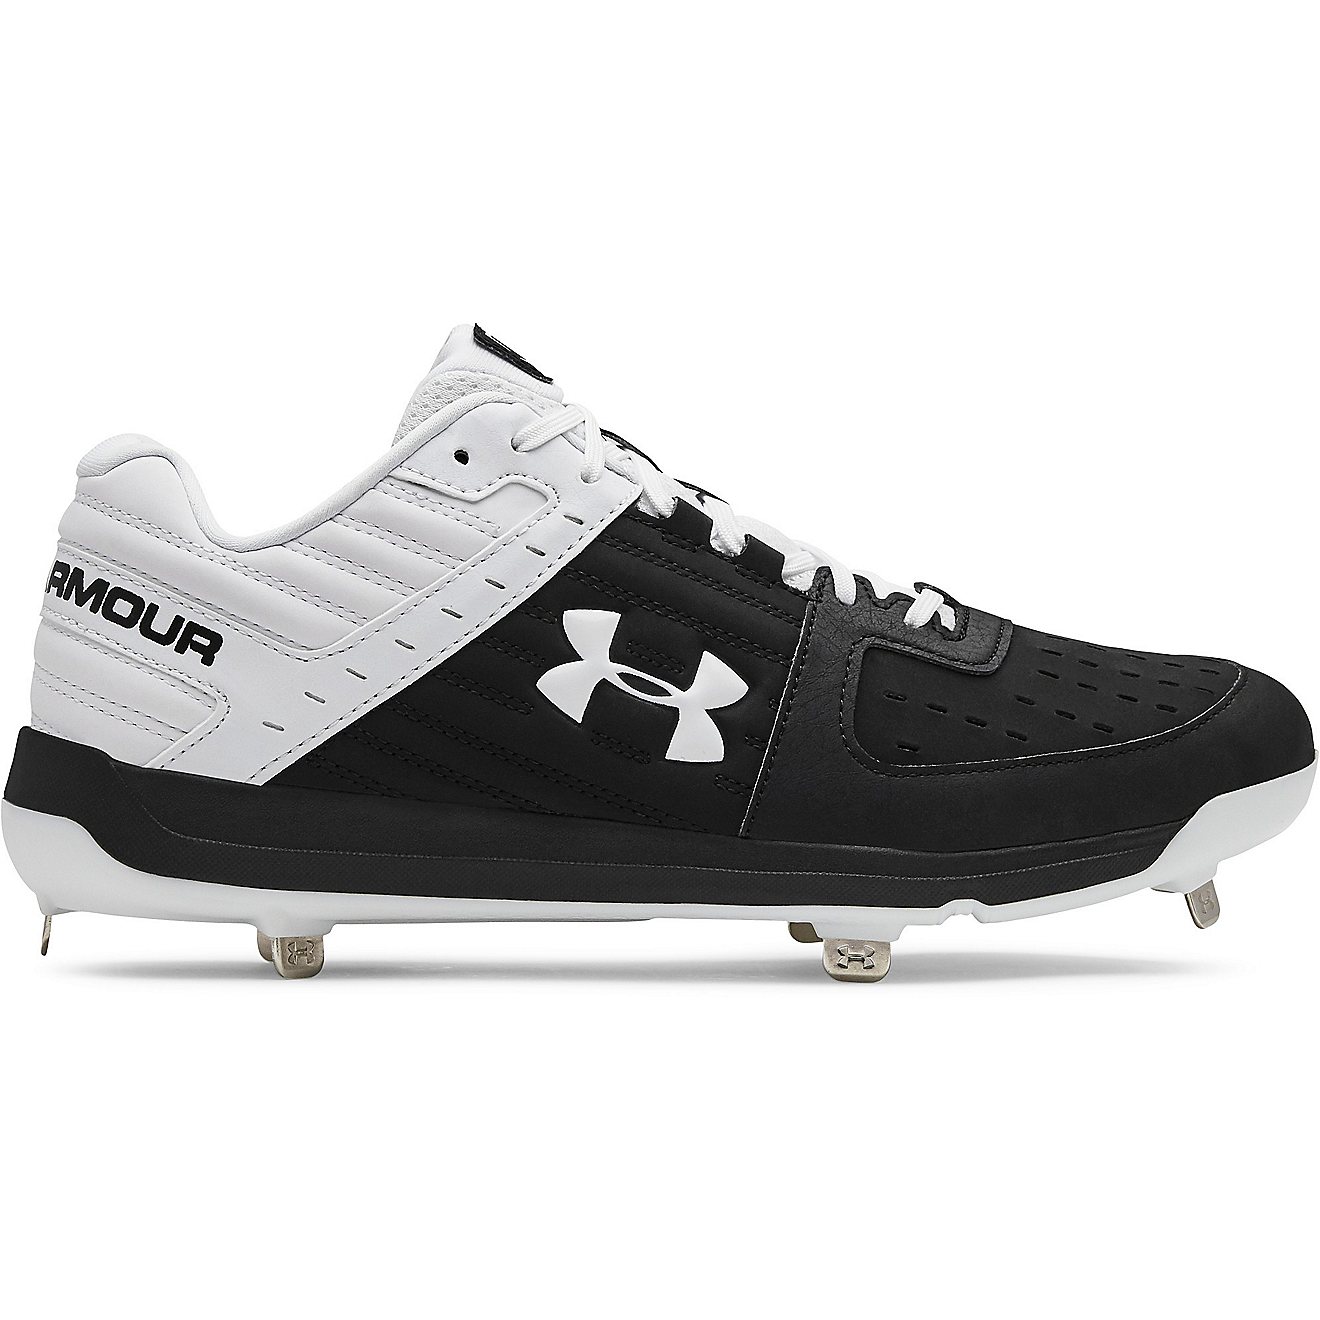 Under Armour Men's Ignite Low Metal Baseball Cleats                                                                              - view number 1